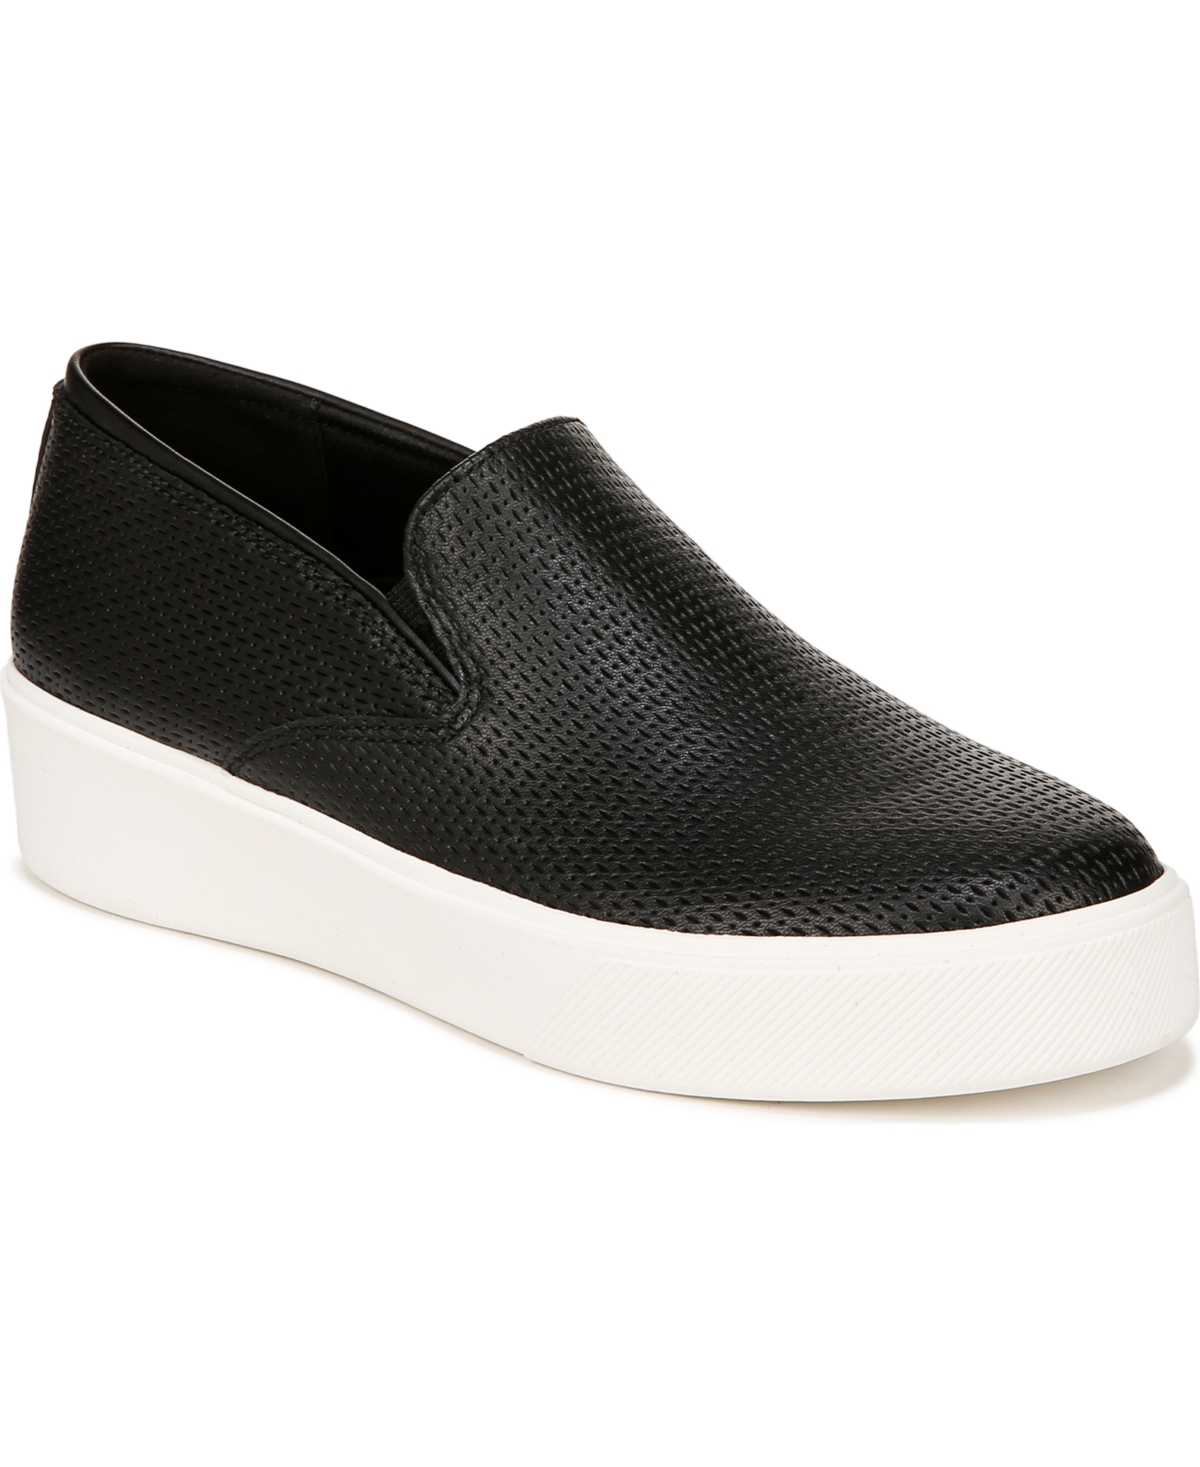 Marianne 3.0 Slip-on Sneakers - Warm White Leather